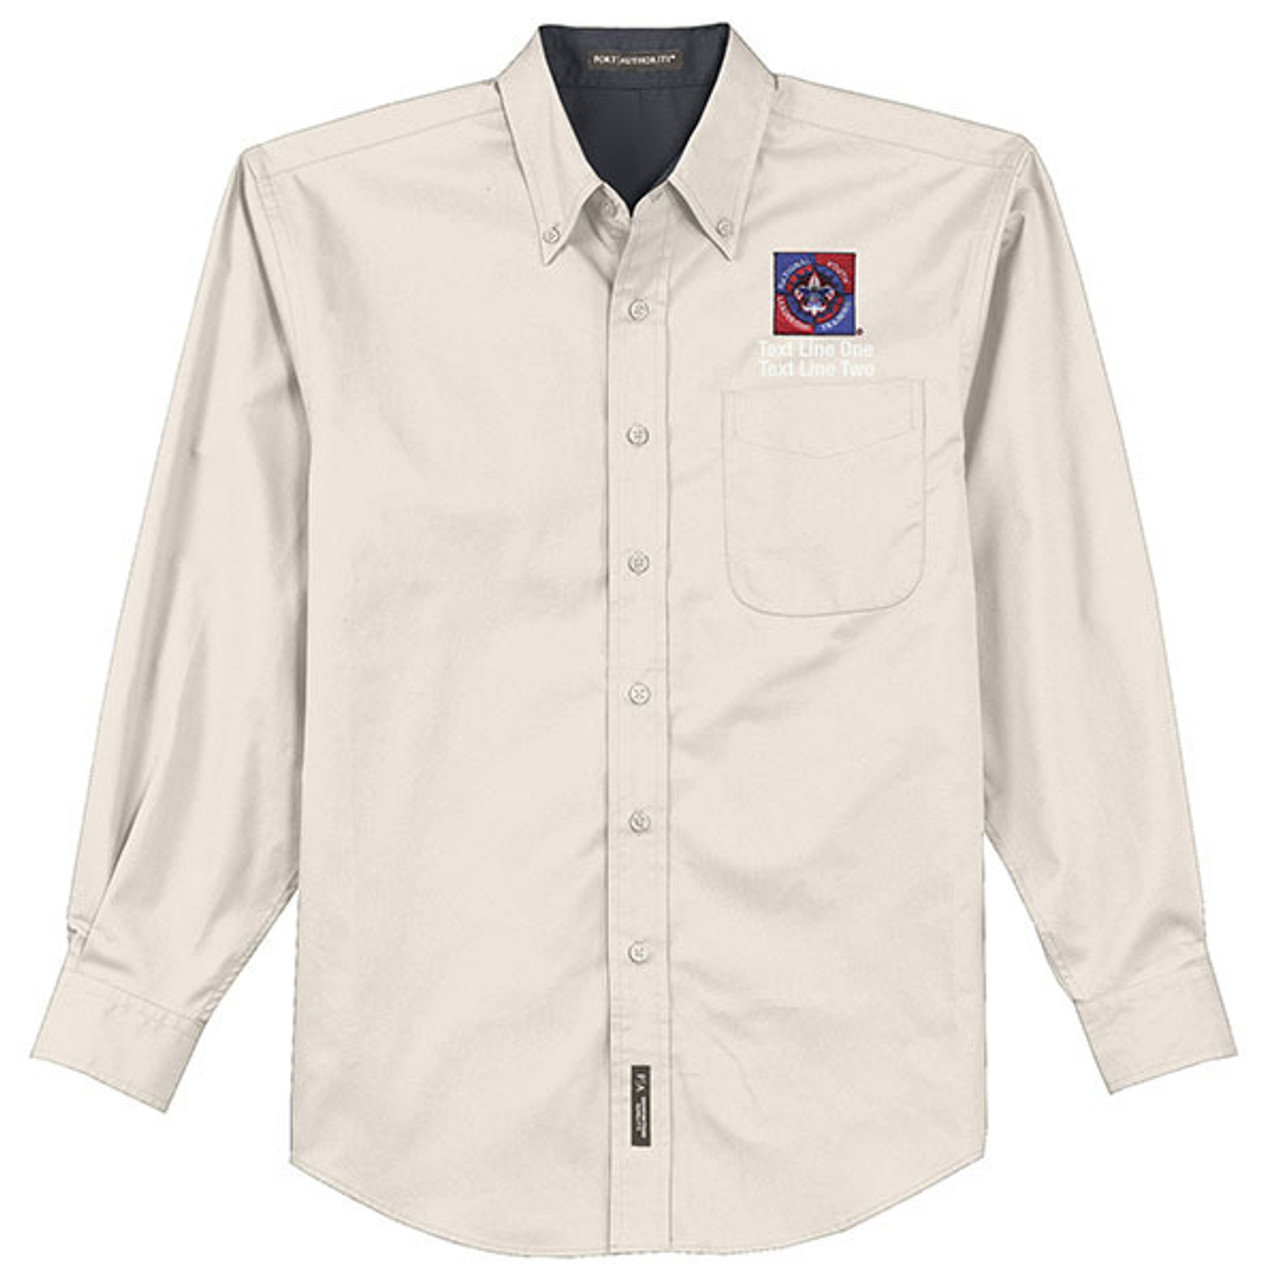 Long Sleeve Easy Care Shirt Men's with Embroidered NYLT Logo